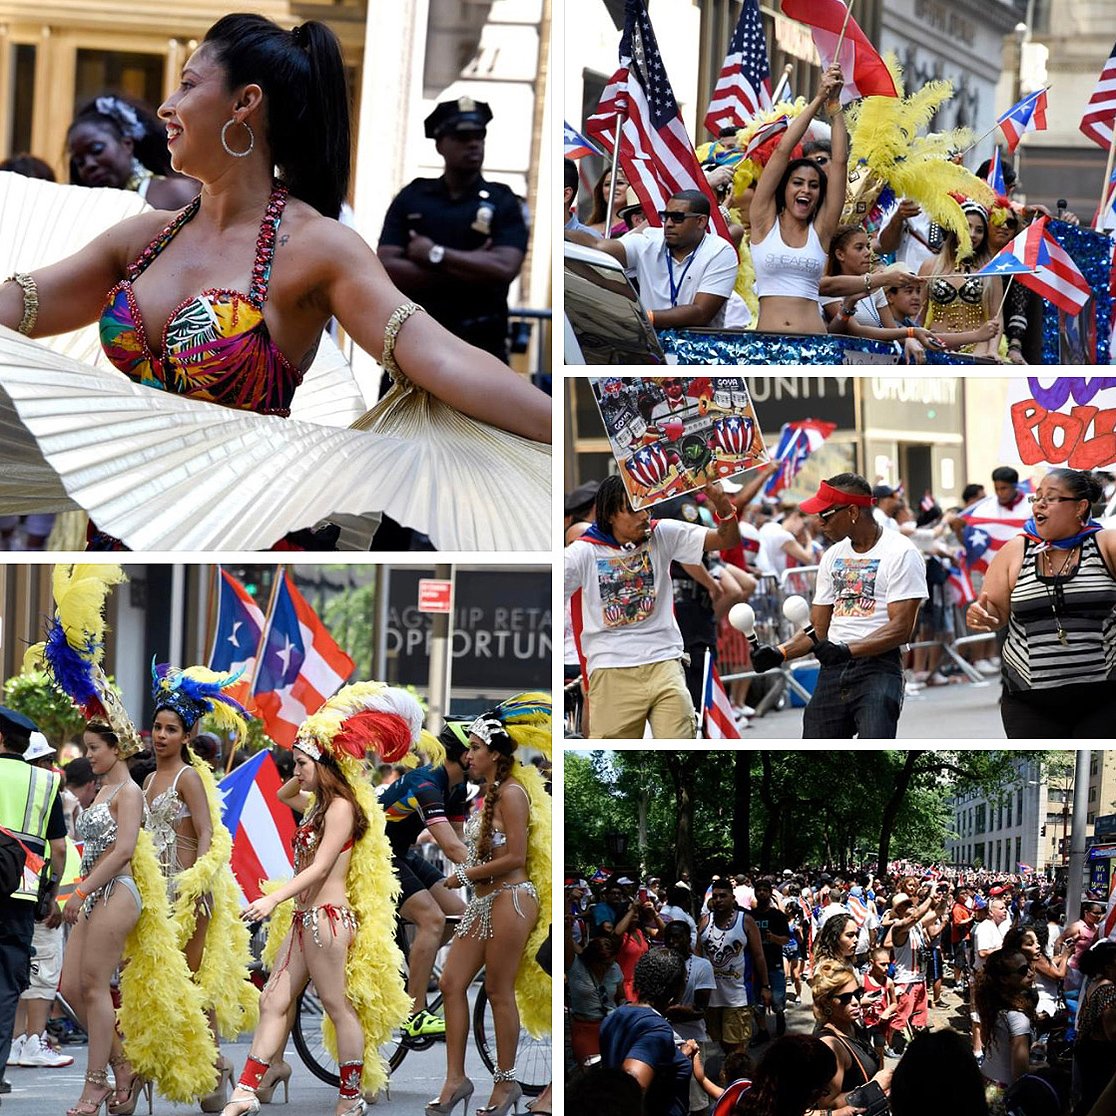 NATIONAL PUERTO RICAN DAY PARADE